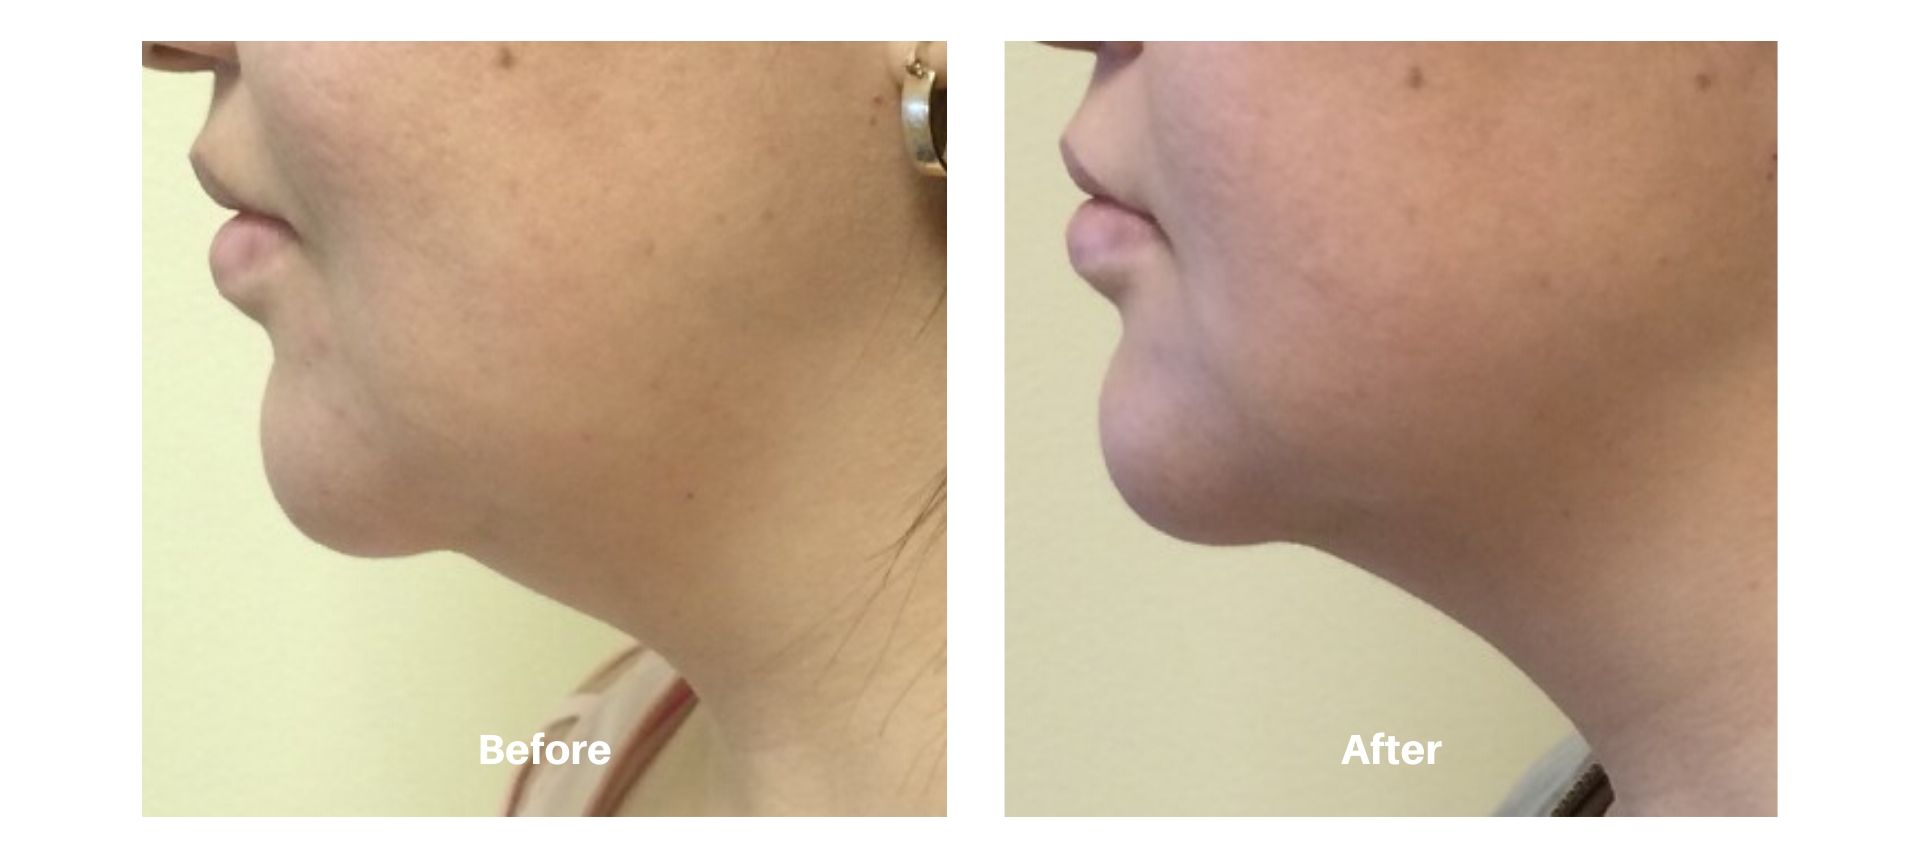 Woman's before and after results from kybella treatment at Always Beautiful.